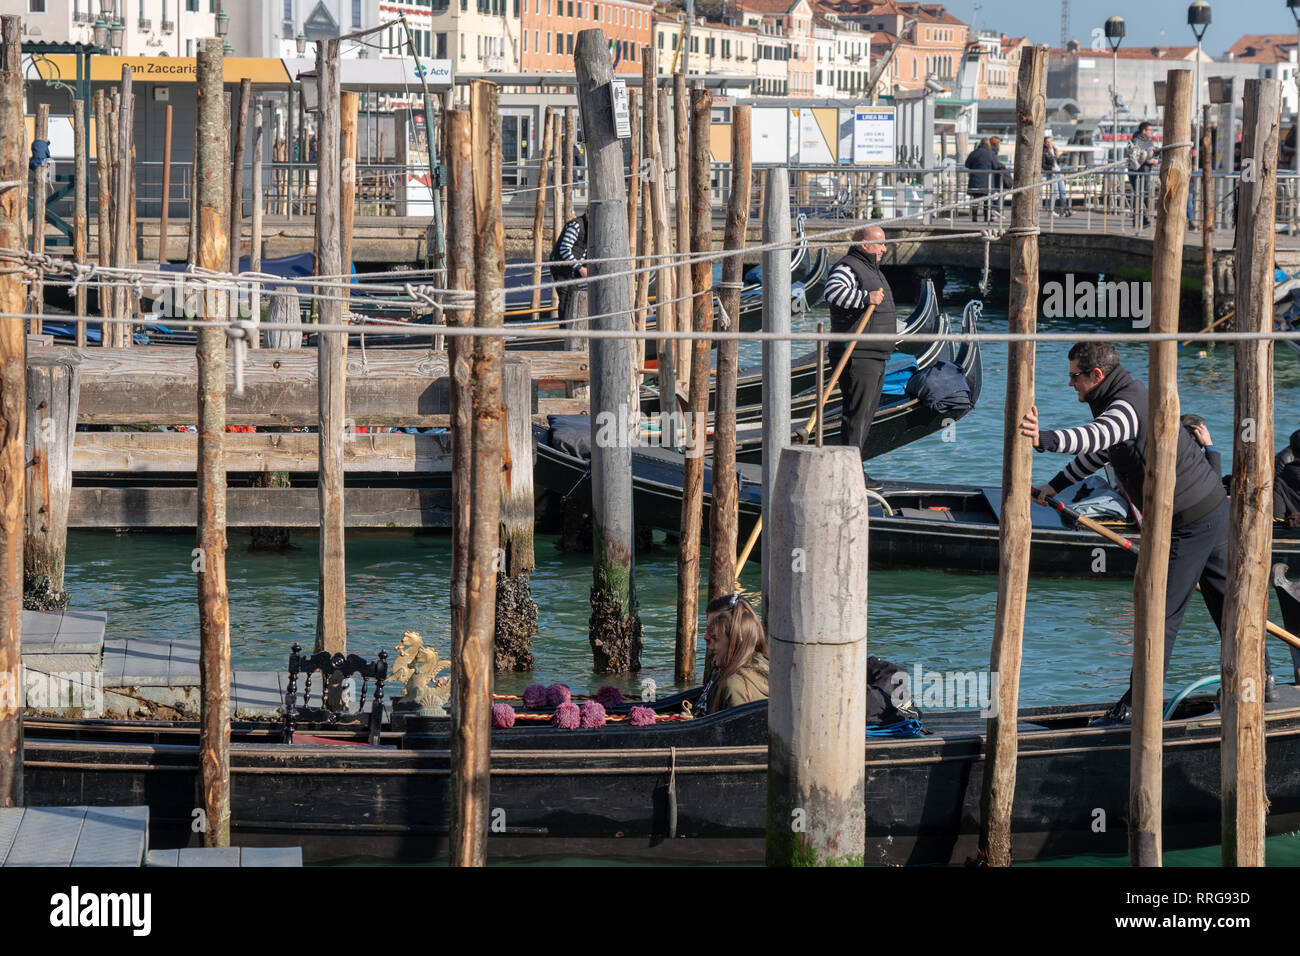 General views of Venice. From a series of travel photos in Italy. Photo date: Wednesday, February 13, 2019. Photo: Roger Garfield/Alamy Stock Photo